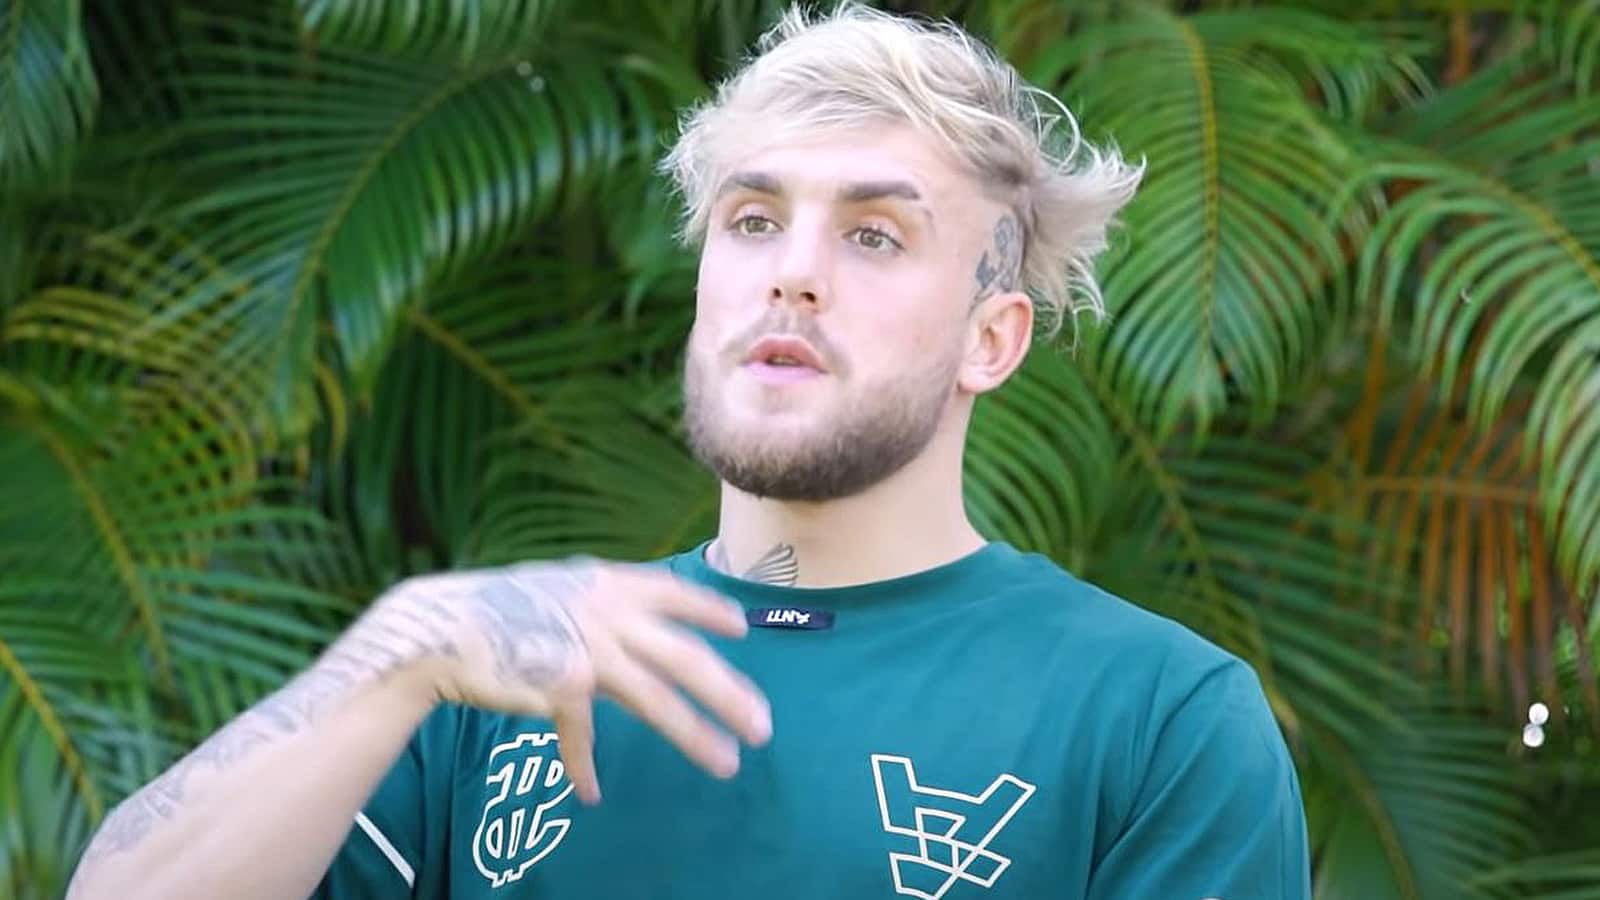 Jake Paul hits back at accusations of rigging boxing matches